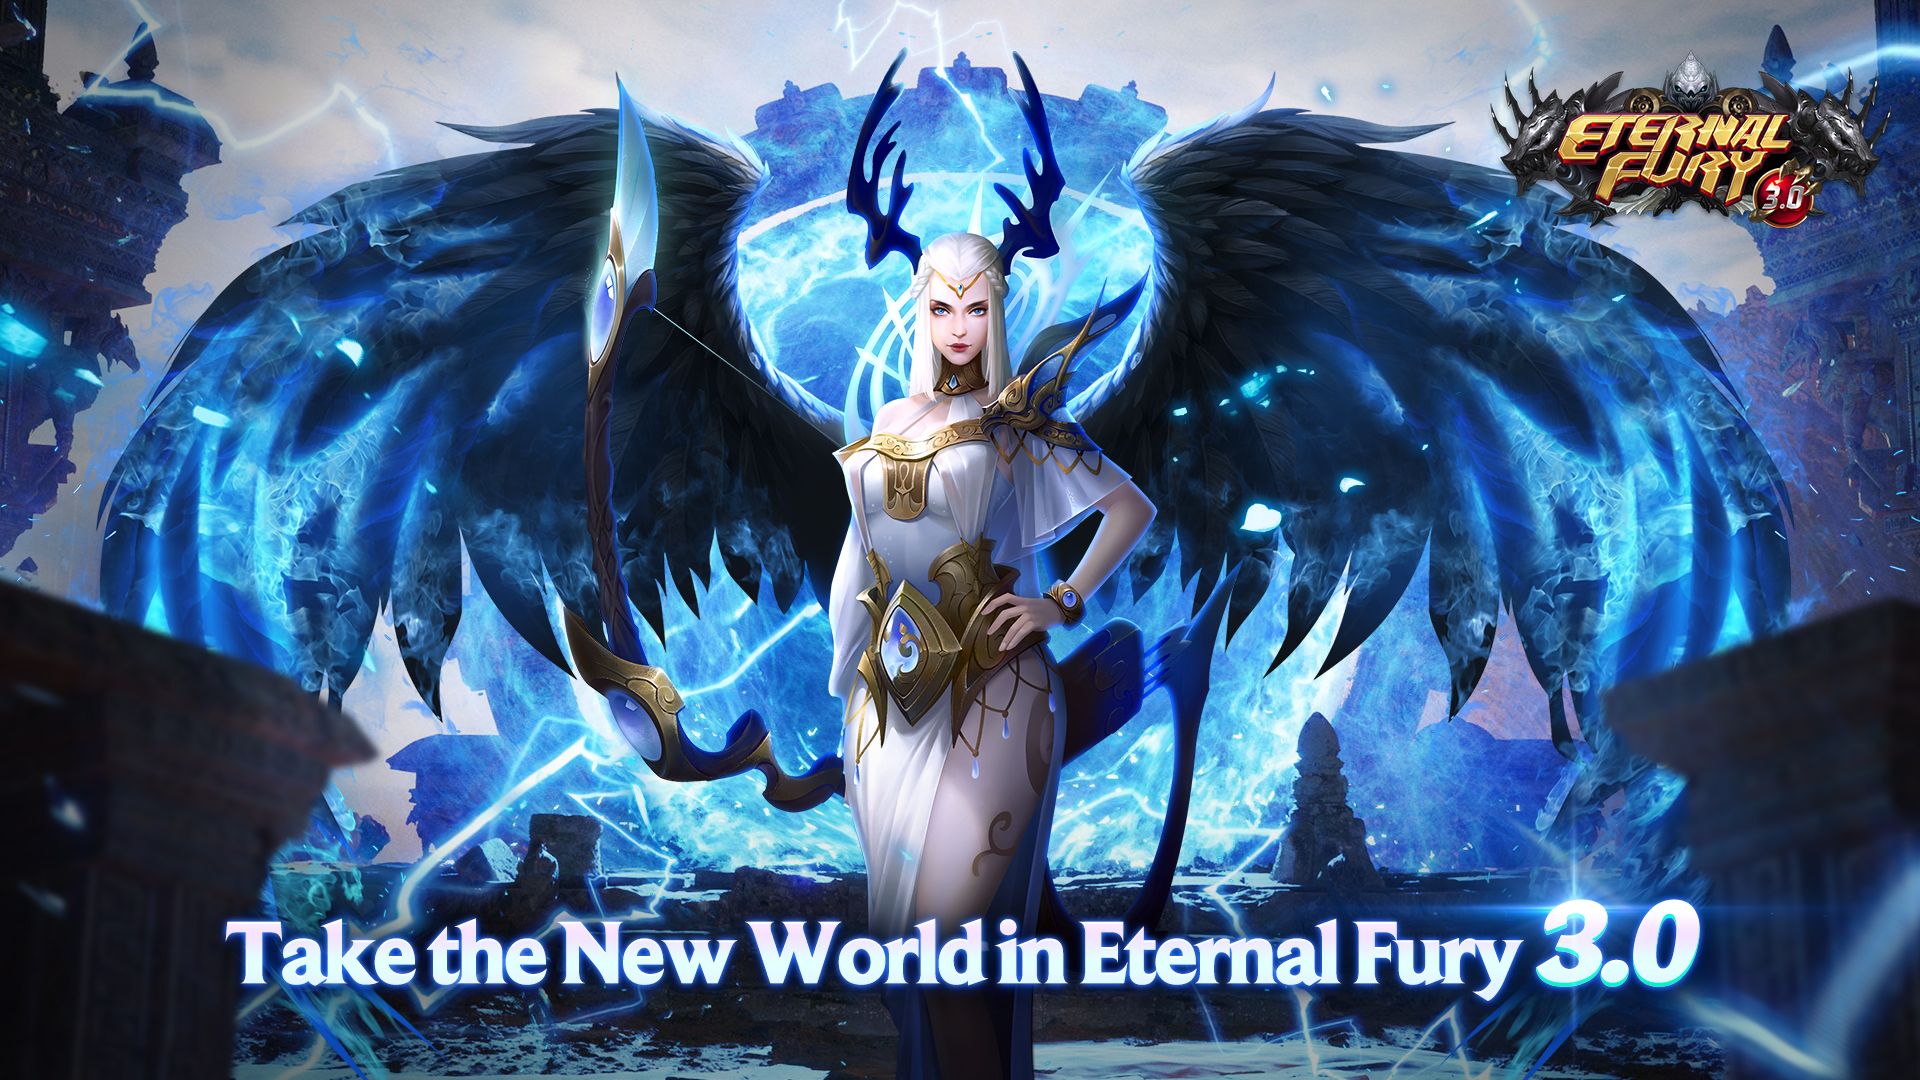 Eternal Fury, the Popular Browser-based Fantasy MMO, Gets New Maps, Mounts, and More in Game-changing 3.0 Update